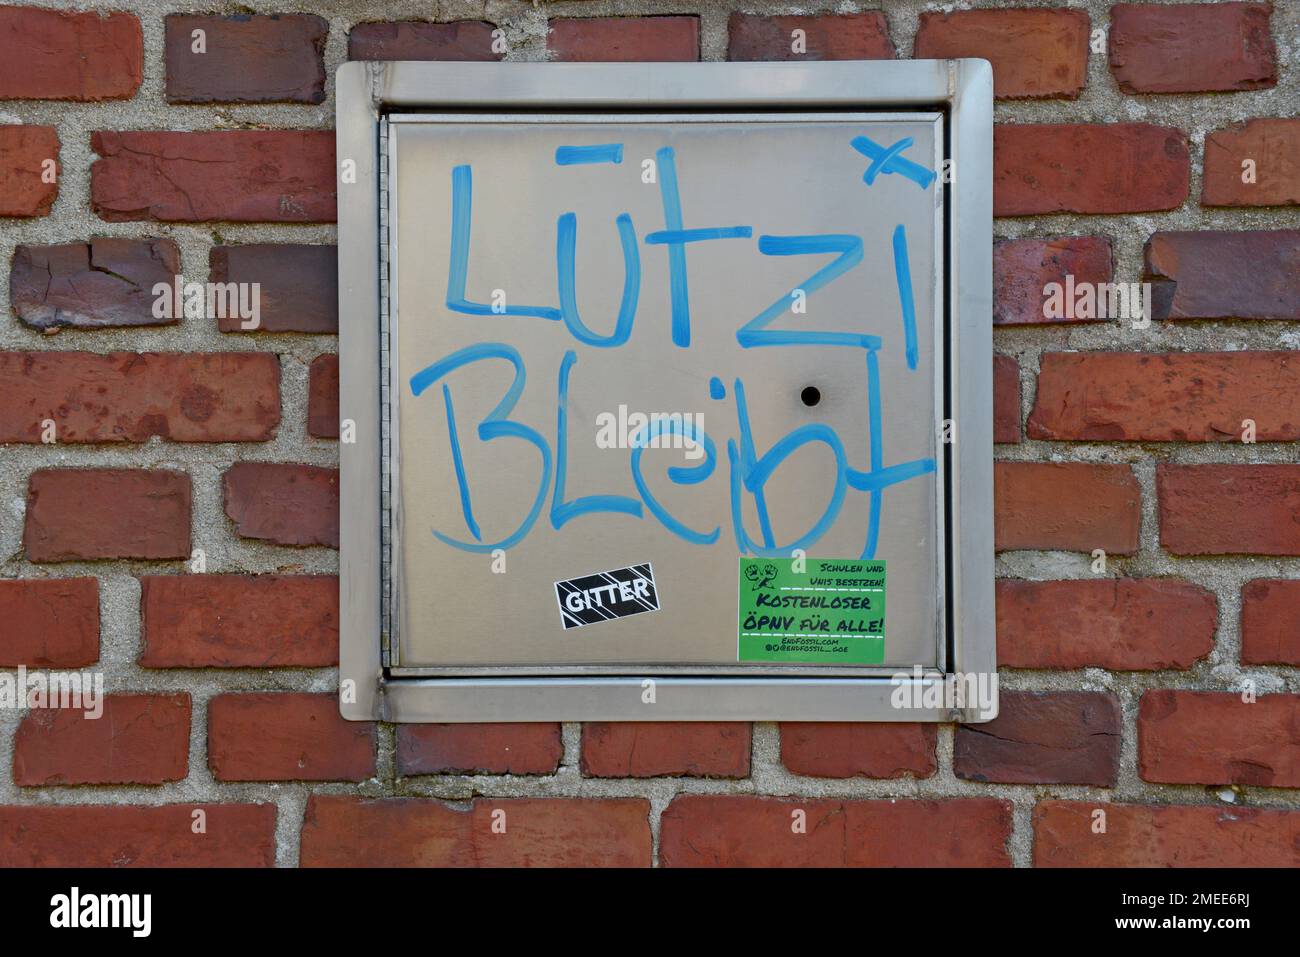 Protest graffiti Lutzi Bleibt (Lutzi stays) in Keyenberg, Germany, near Garzweiler II open cast lignite  coal mine, site of climate change protests Stock Photo